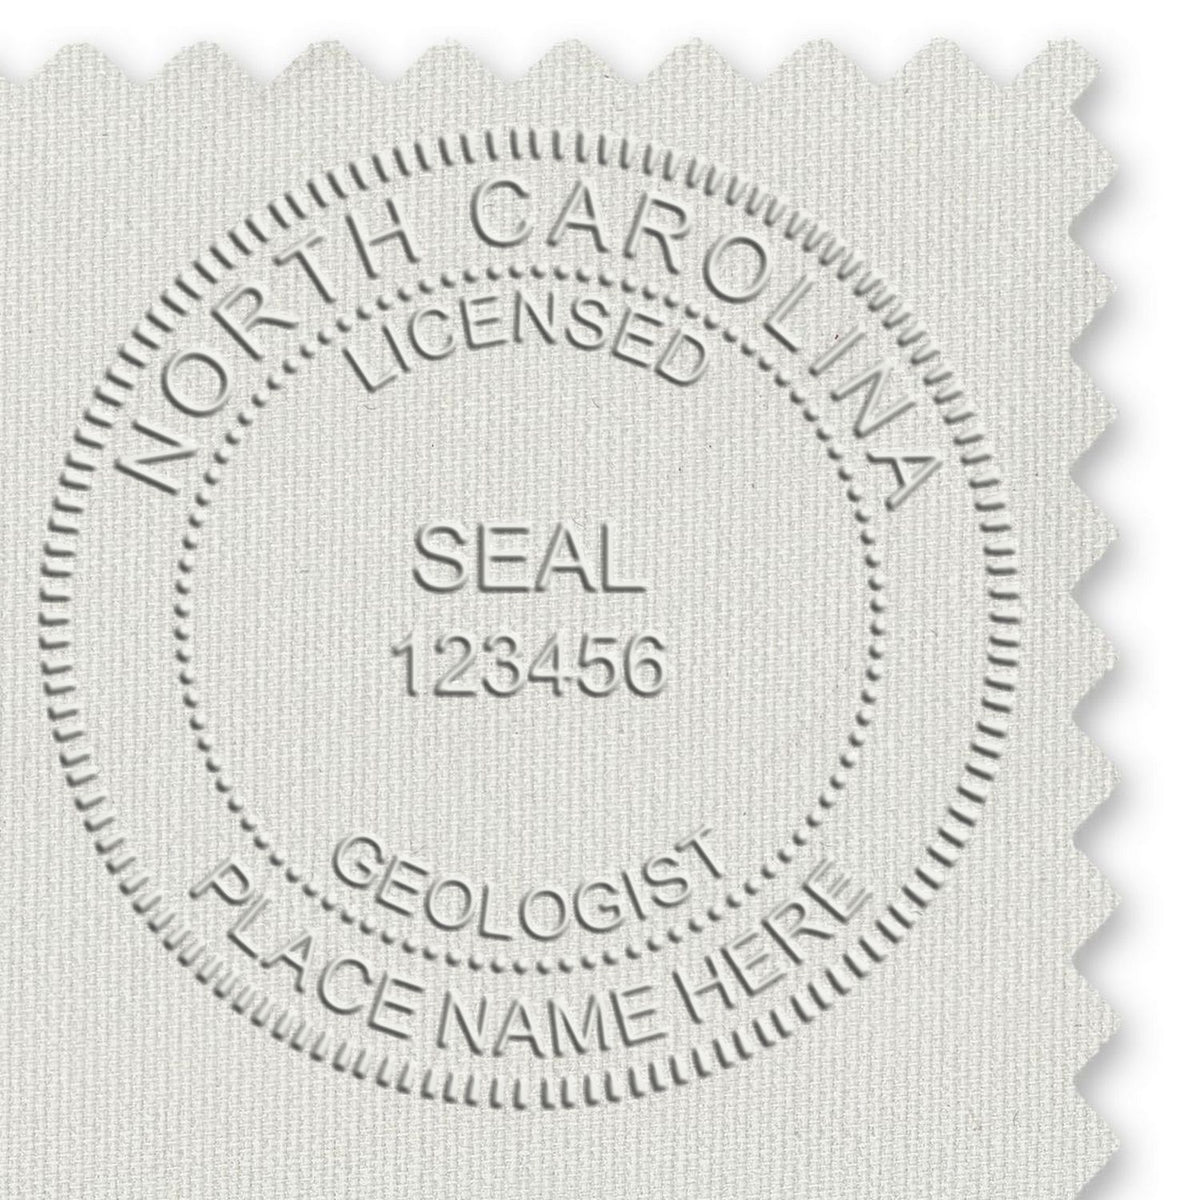 Another Example of a stamped impression of the Handheld North Carolina Professional Geologist Embosser on a office form